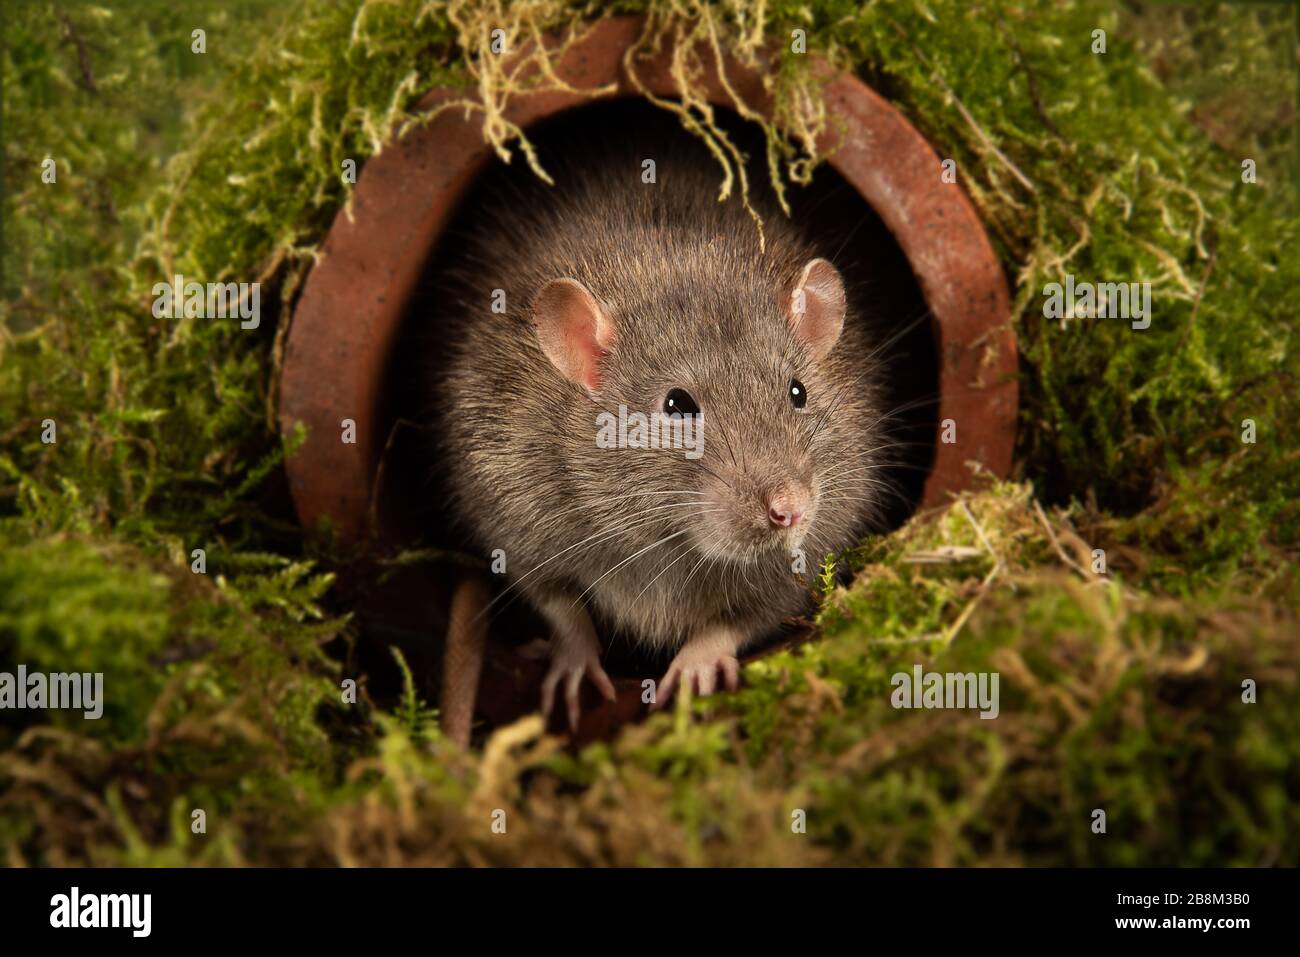 A close up portrait of the head and face of a rat as it emerges from a drainpipe and facing forward Stock Photo